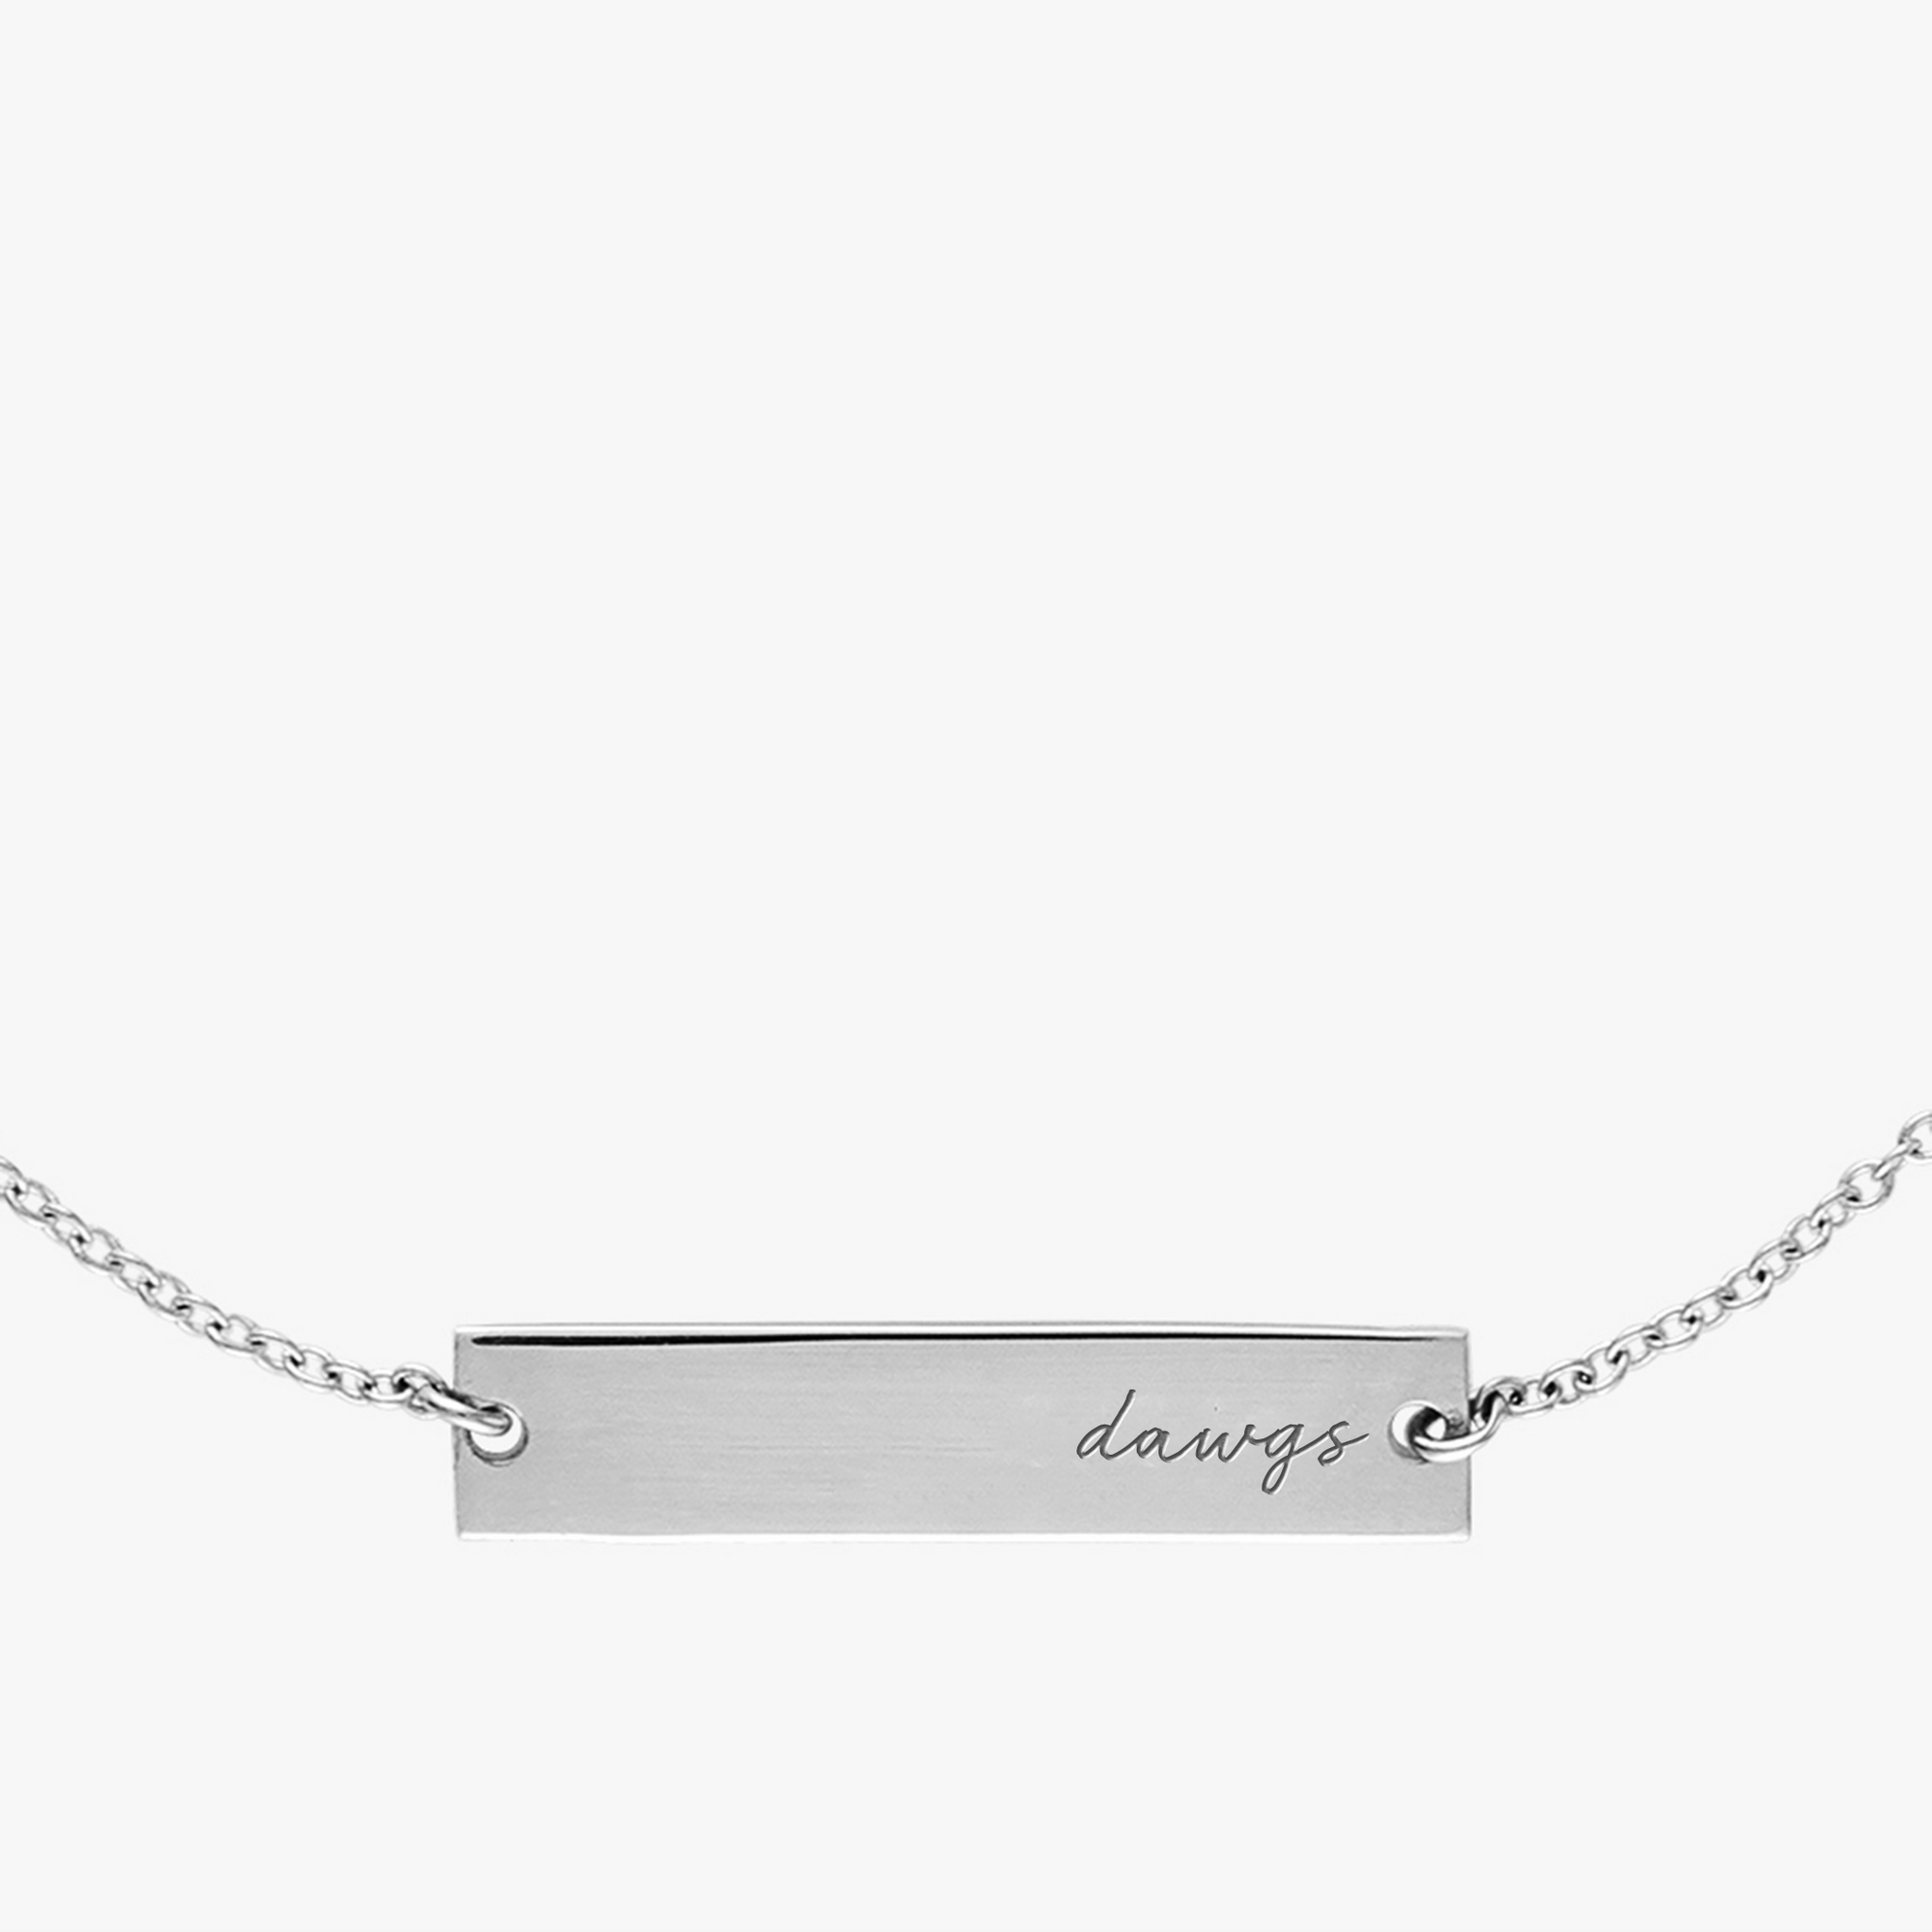 UGA Dawgs Horizontal Necklace Sterling Silver Close Up